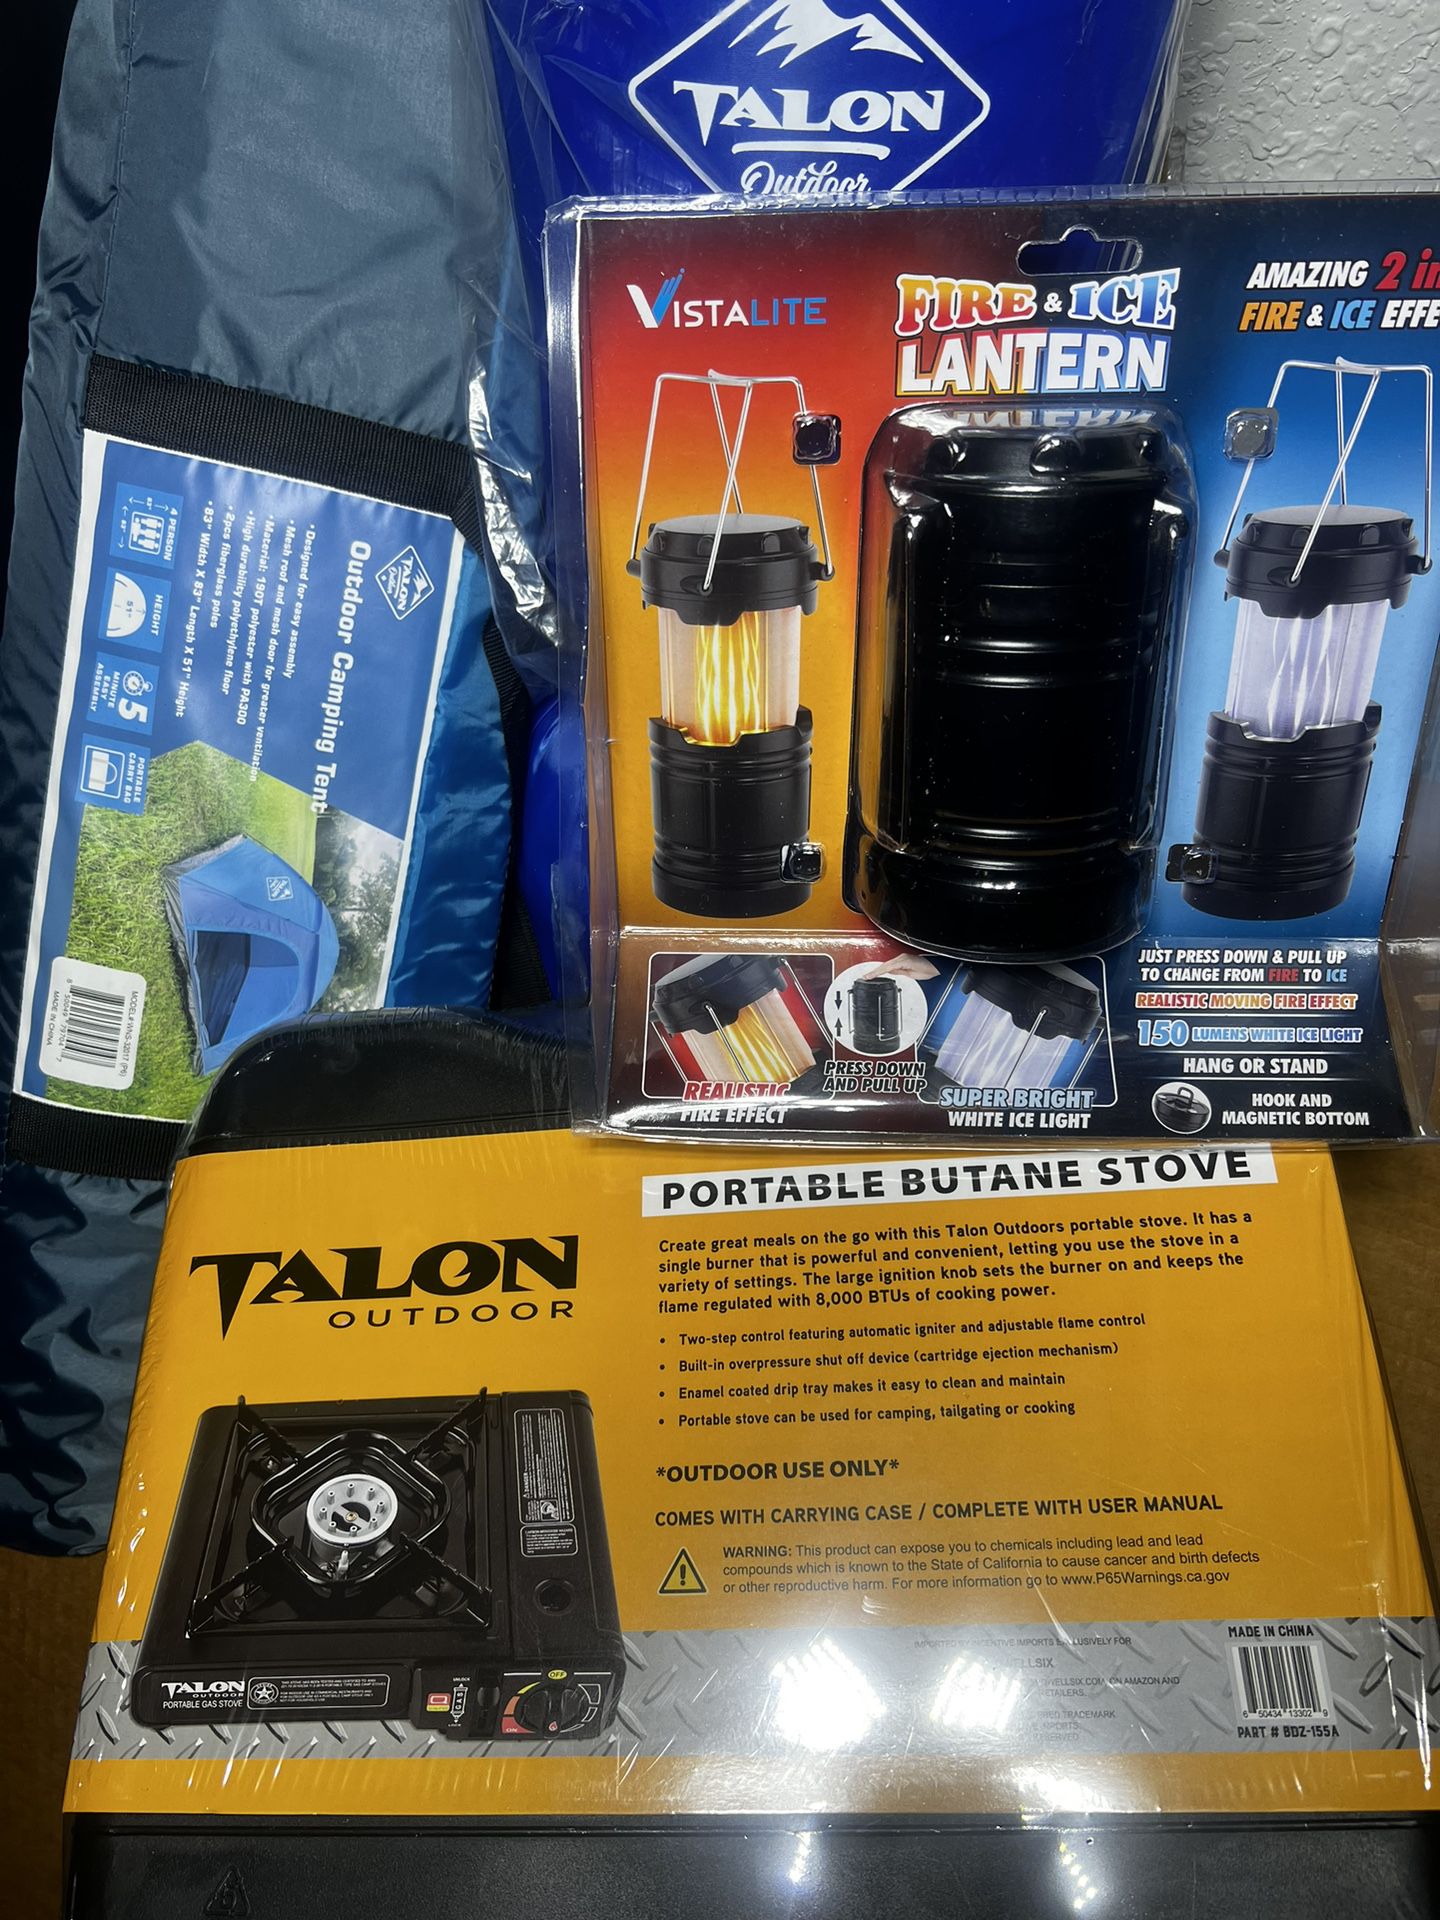 COMPLETE CAMPING EQUIPMENT, 2 OF EACH.  READY TO GO. NEW NEVER USED IN PERFECT CONDITION. 